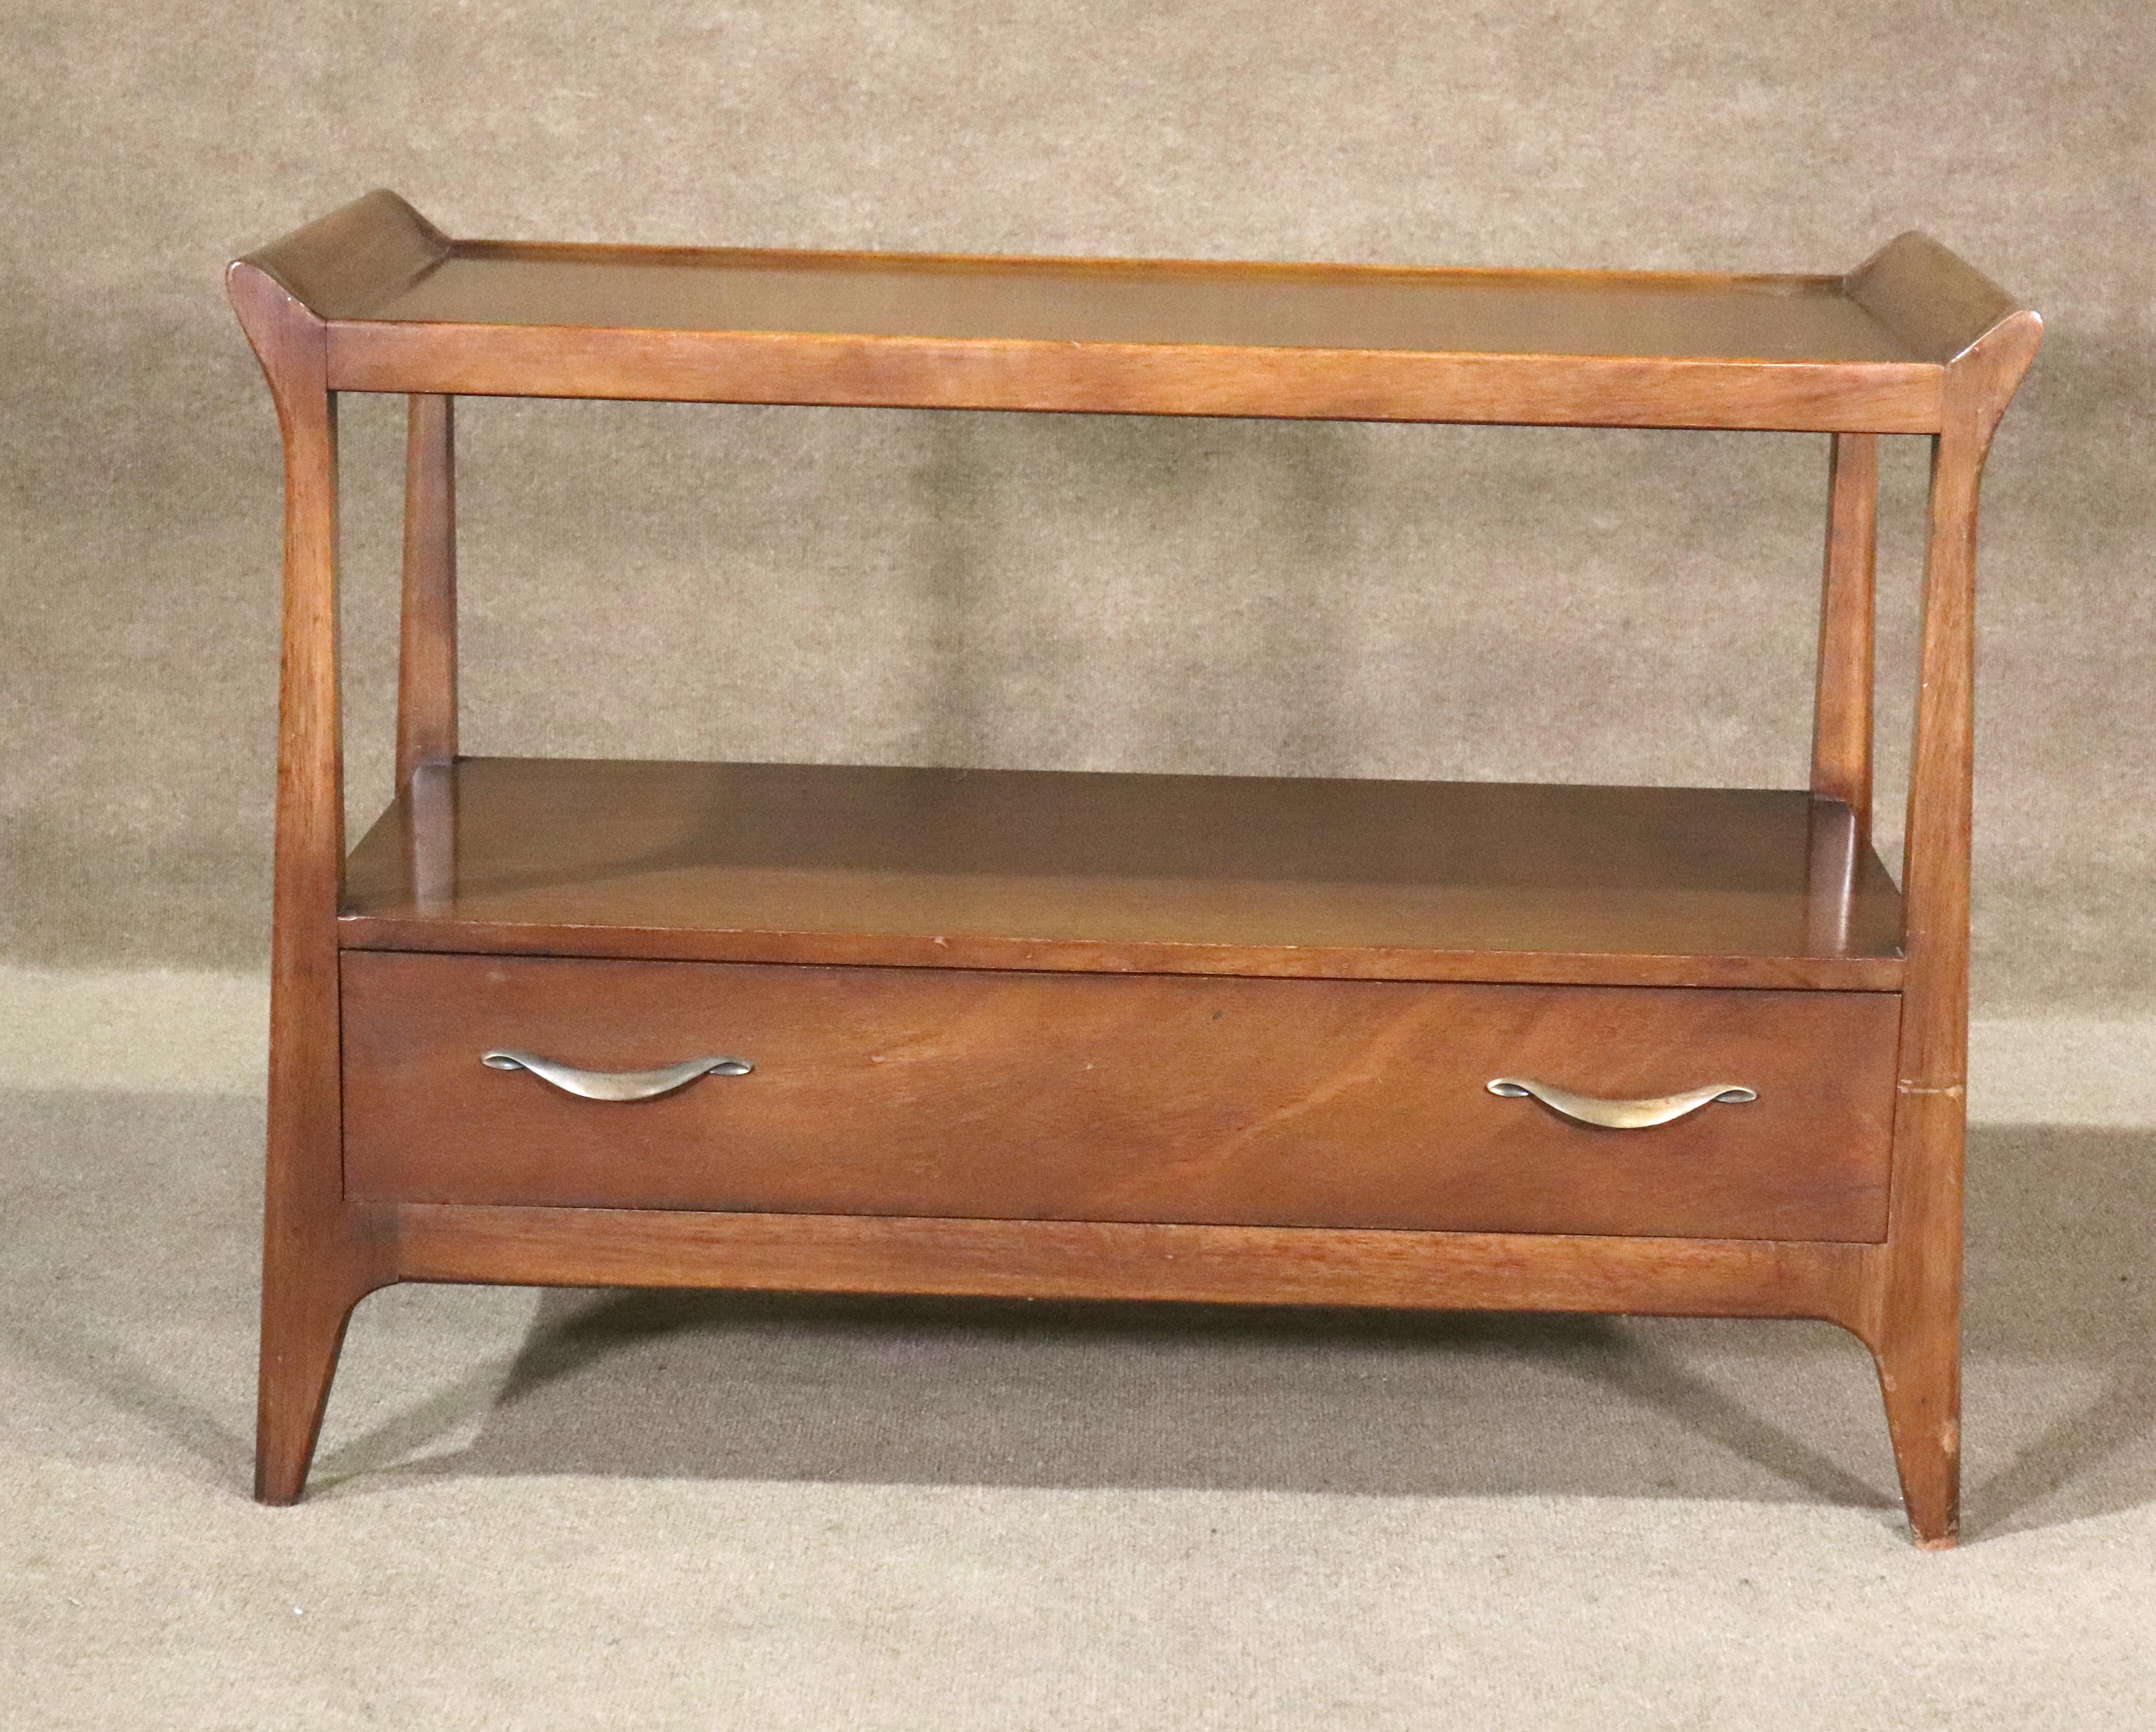 Single drawer rolling cart by Drexel in genuine mahogany. Wheels can come off to make a stationary console table.
Please confirm location NY or NJ